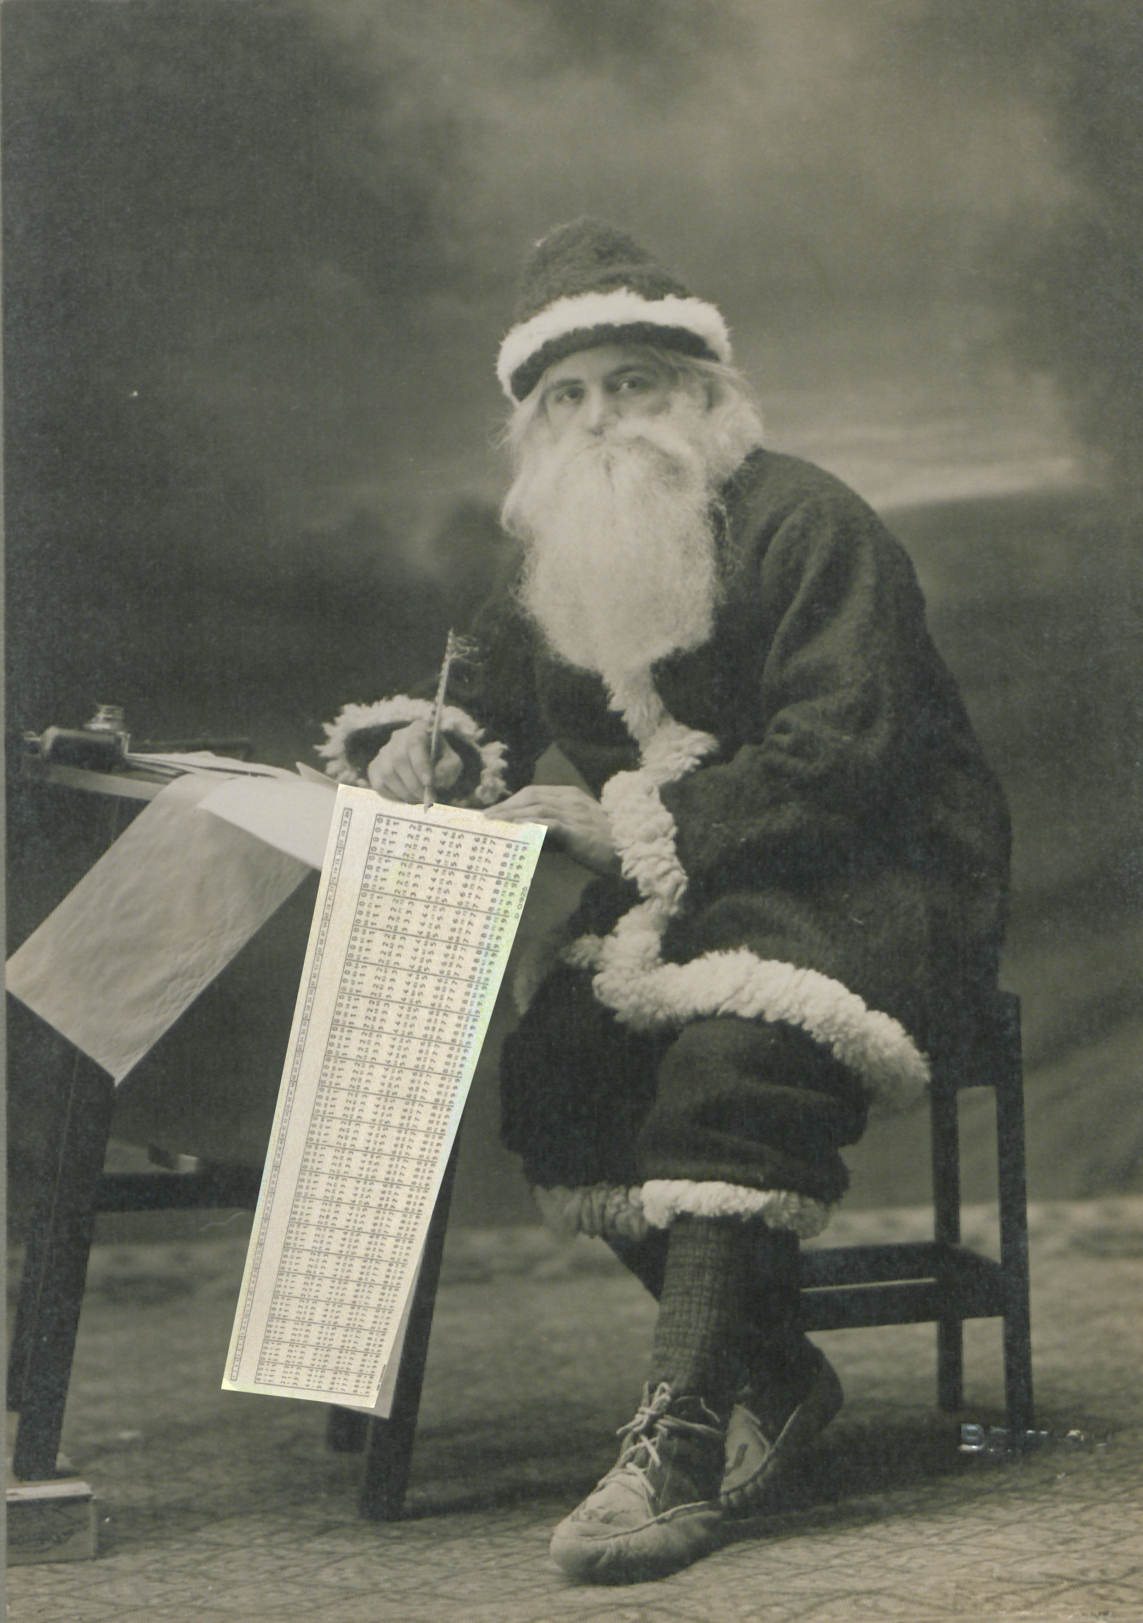 An old-timey photo of Santa Claus where a punch-card has been awkwardly photoshopped in so it looks kind of like he's writing on a punch card. It's a stupid visual gag, and not very good.